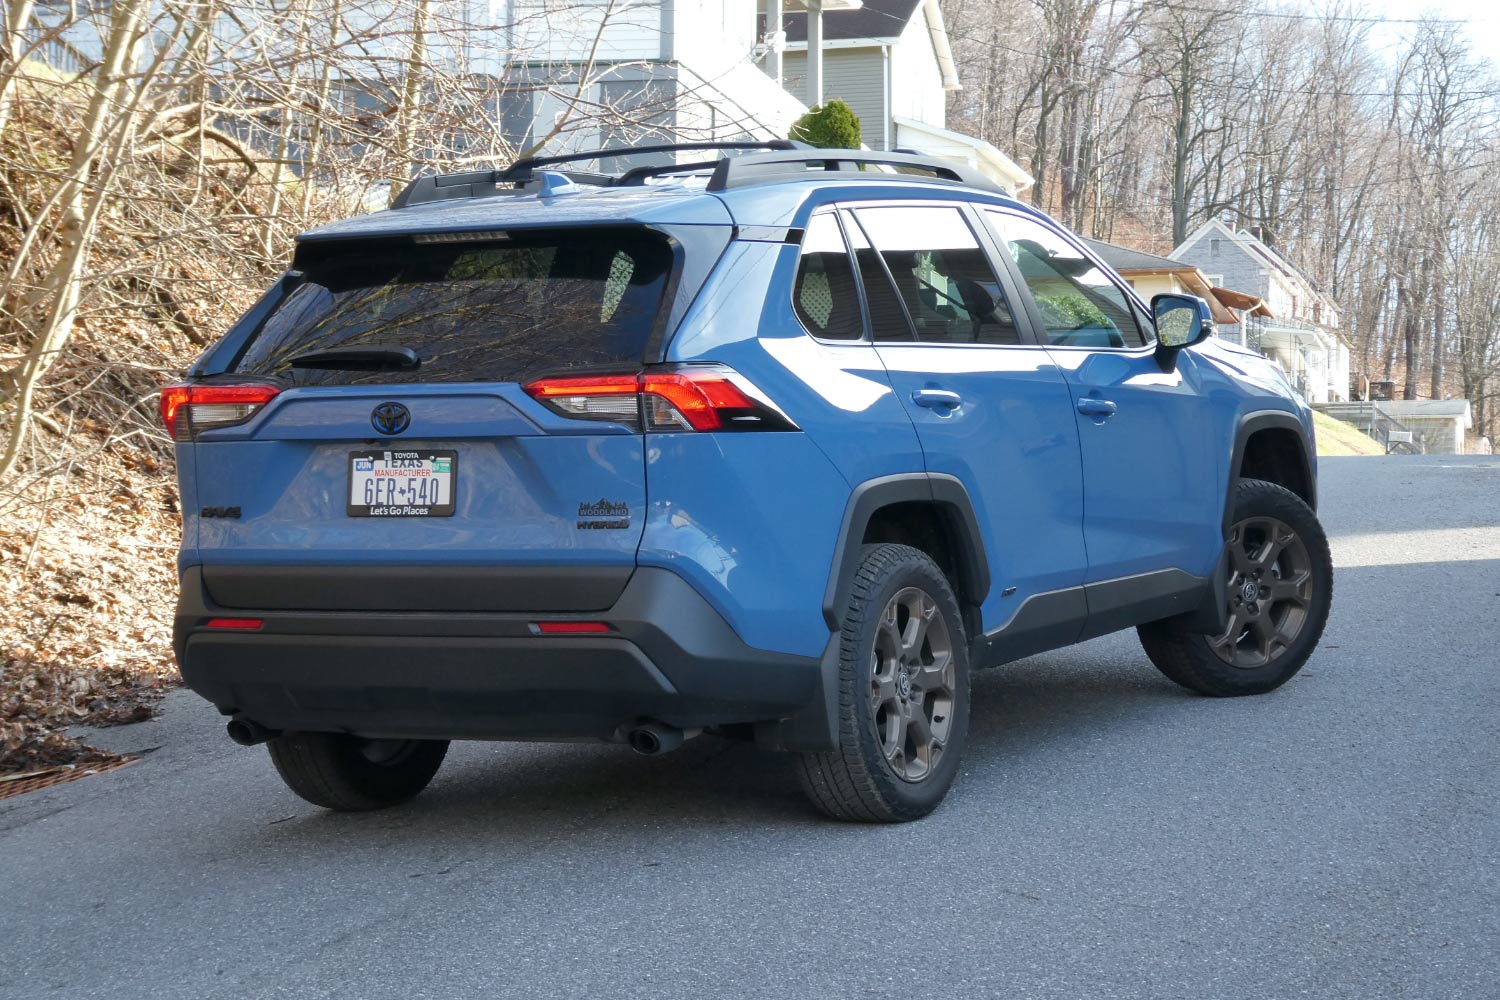 2023 Toyota RAV4 Hybrid Review and Test Drive